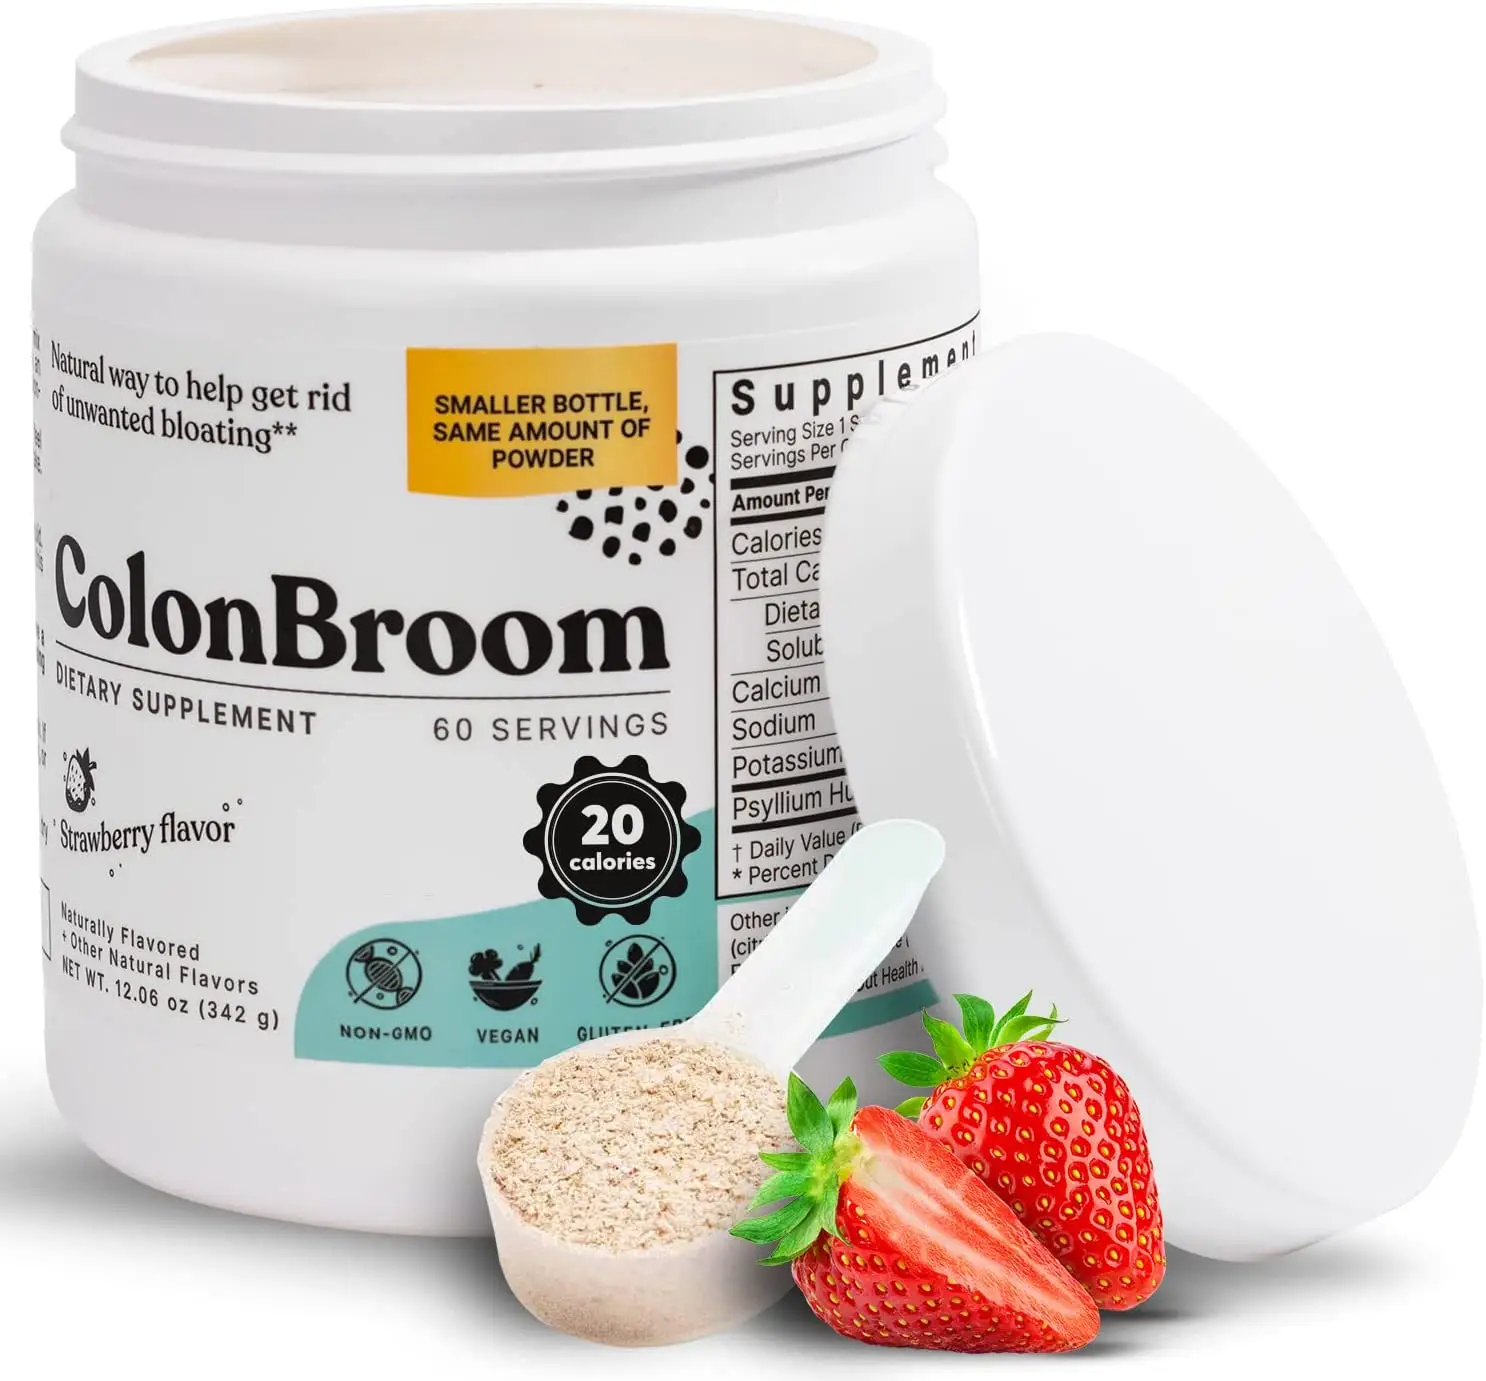 You are currently viewing Colon Broom Reviews – Does Colon Broom Really Work? Ingredients Exposed!